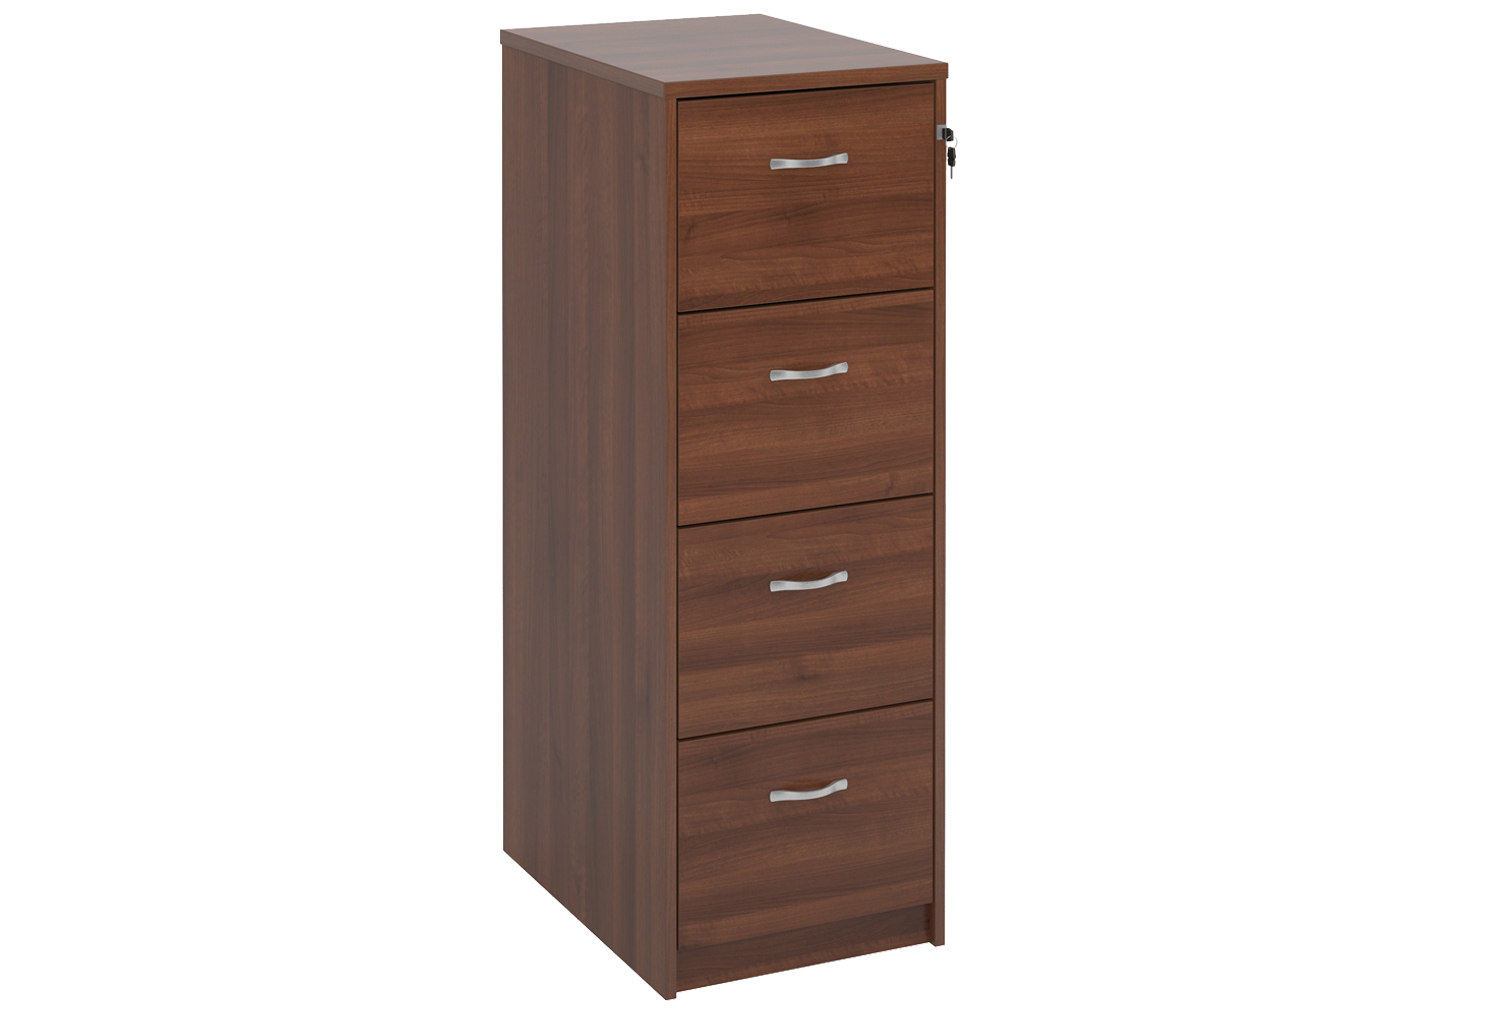 Tully Filing Cabinets, 4 Drawer - 48wx66dx136h (cm), Walnut